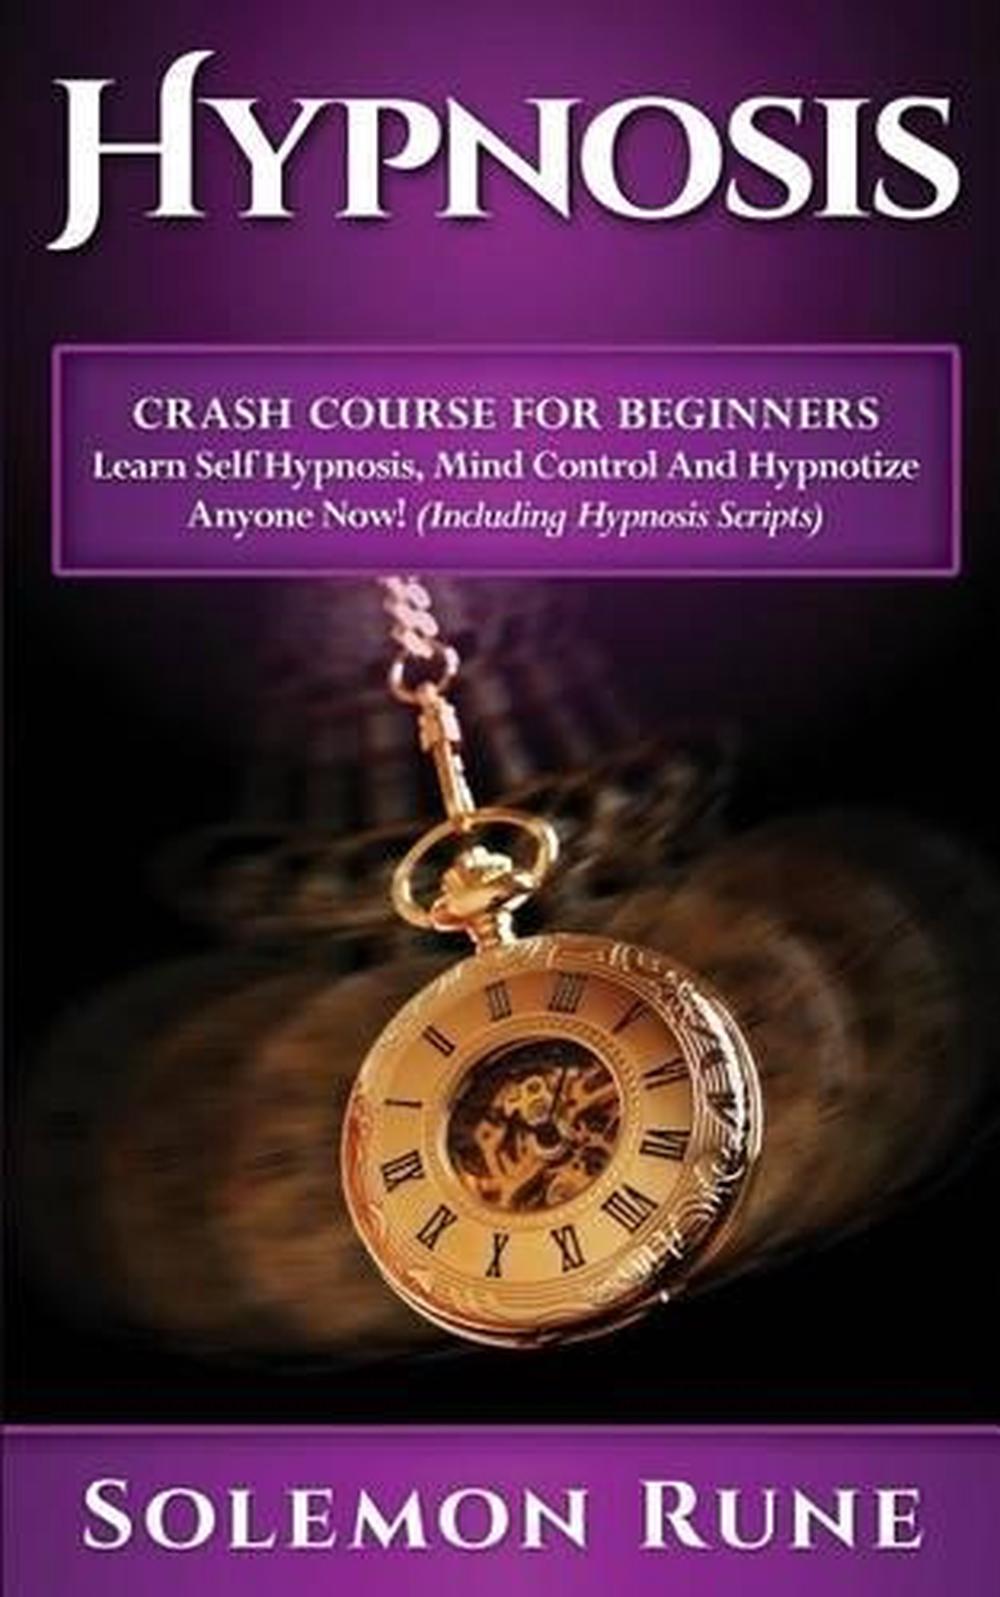 Hypnosis: Crash Course for Beginners - Learn Self Hypnosis ...